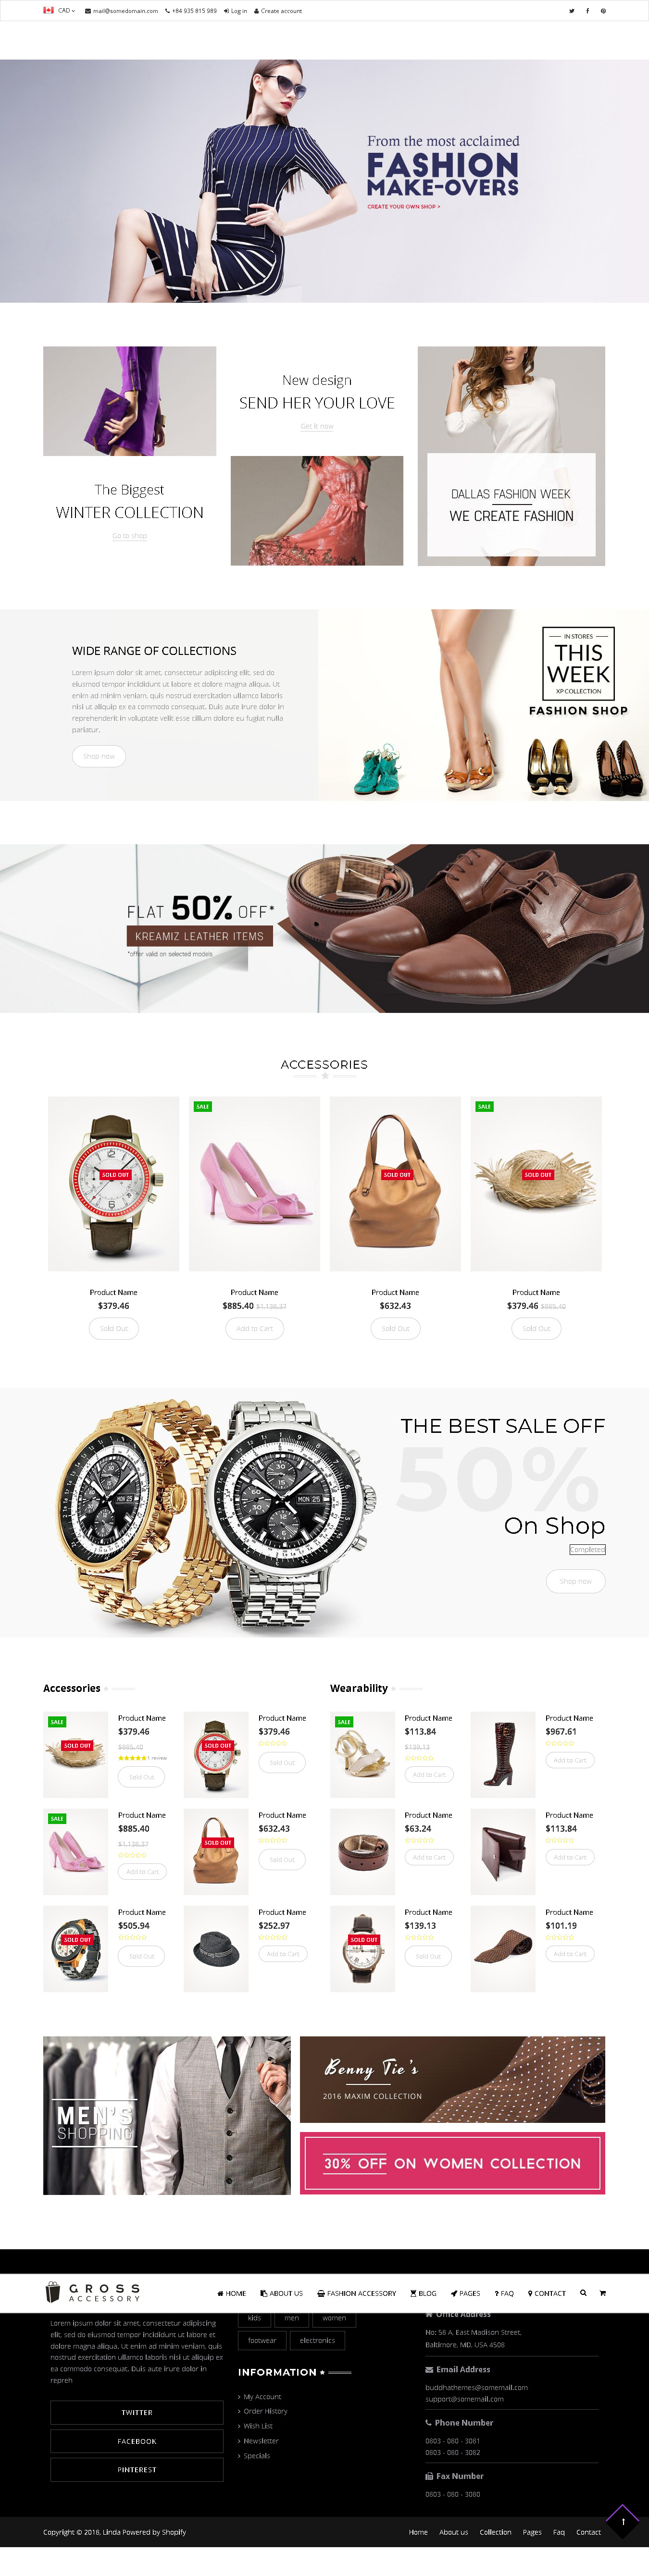 Best Shopify Themes for Accessories Store - Shopify Multi Purpose Theme - Linda